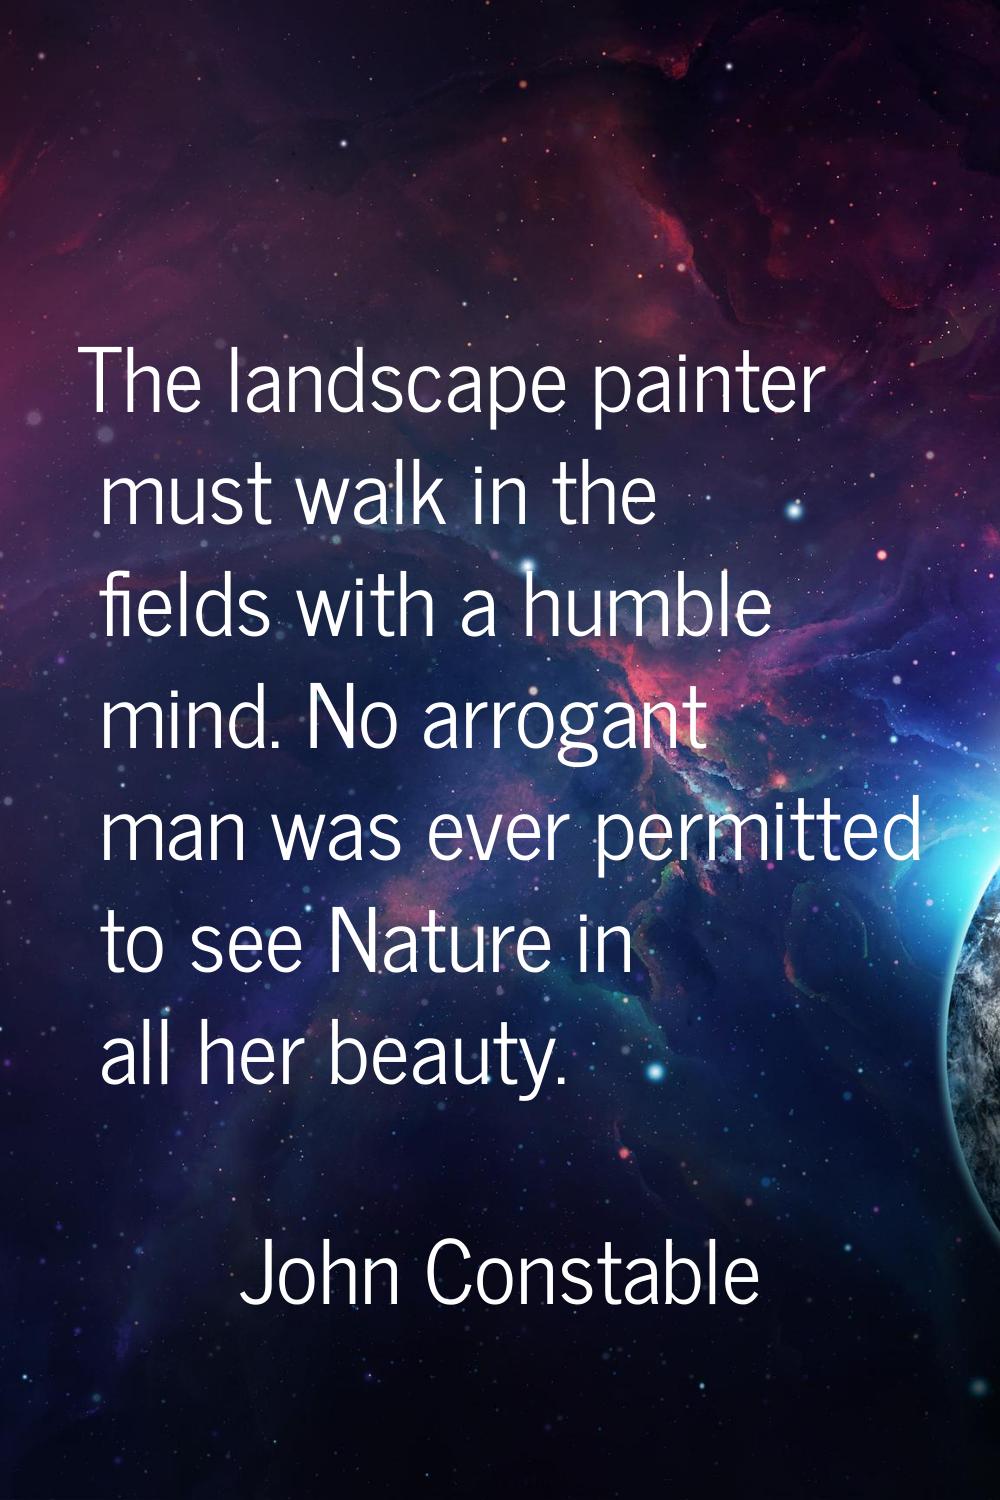 The landscape painter must walk in the fields with a humble mind. No arrogant man was ever permitte